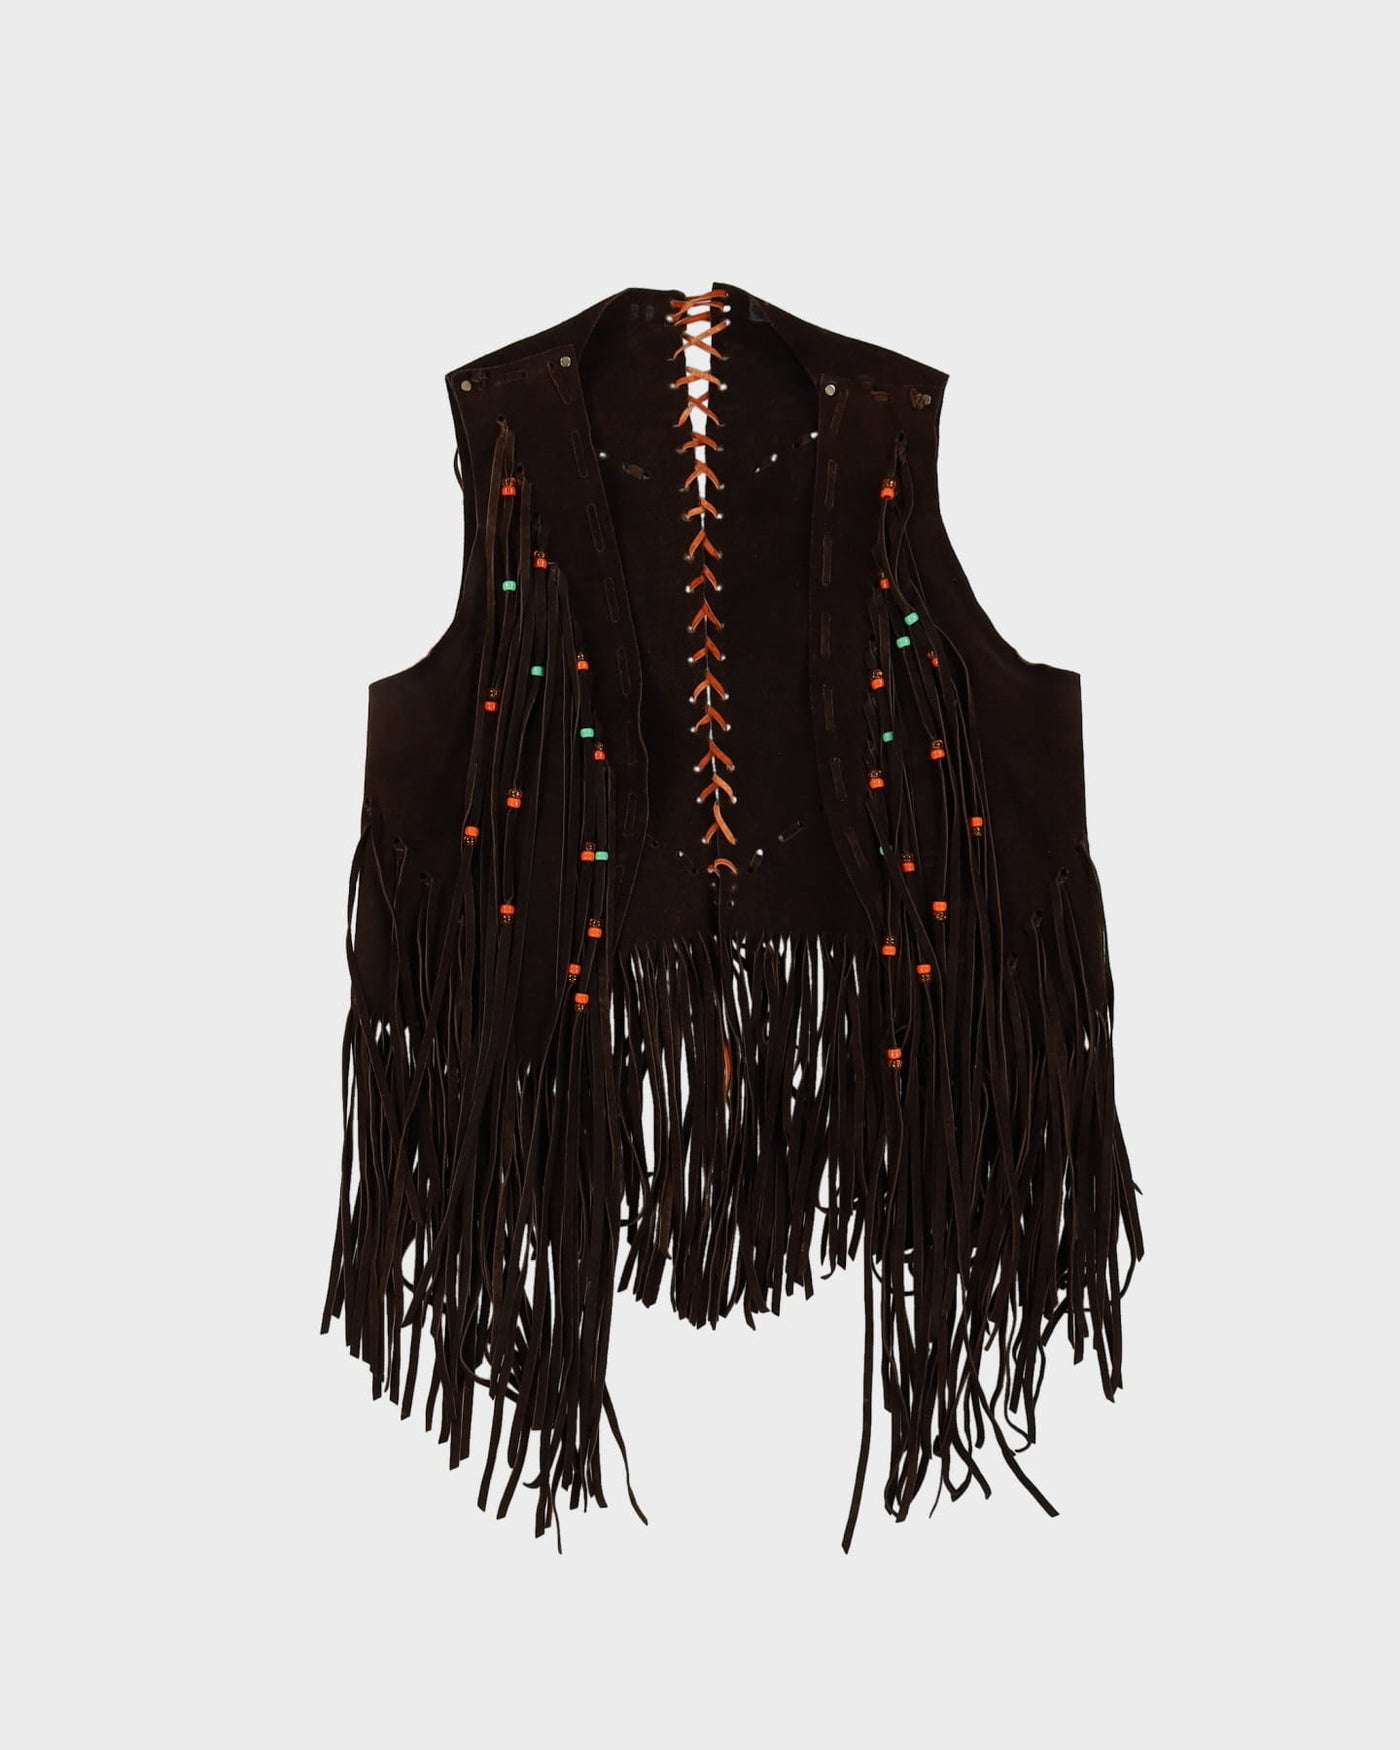 1970s Brown Suede Fringed Waistcoat - M / L